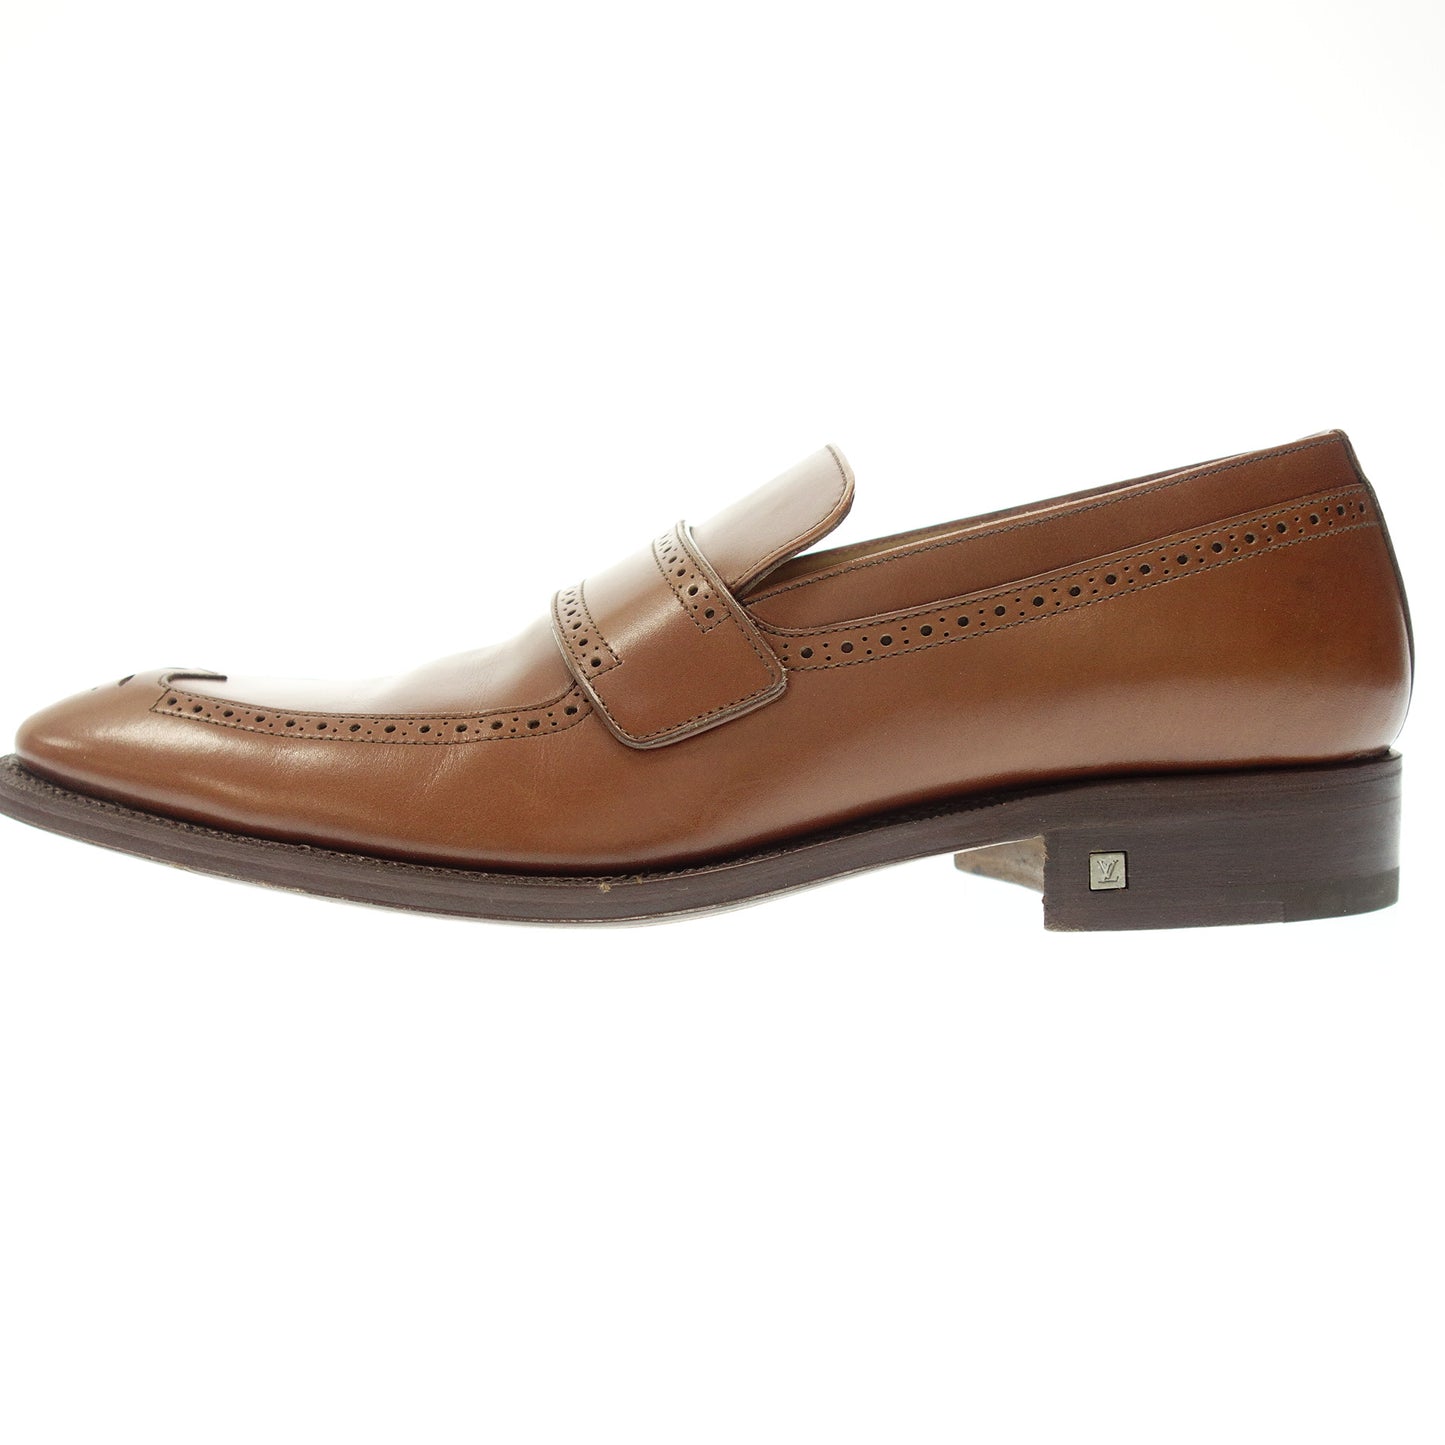 Good condition ◆ Louis Vuitton leather loafer punching men's size 5 brown LOUIS VUITTON [AFC1] 